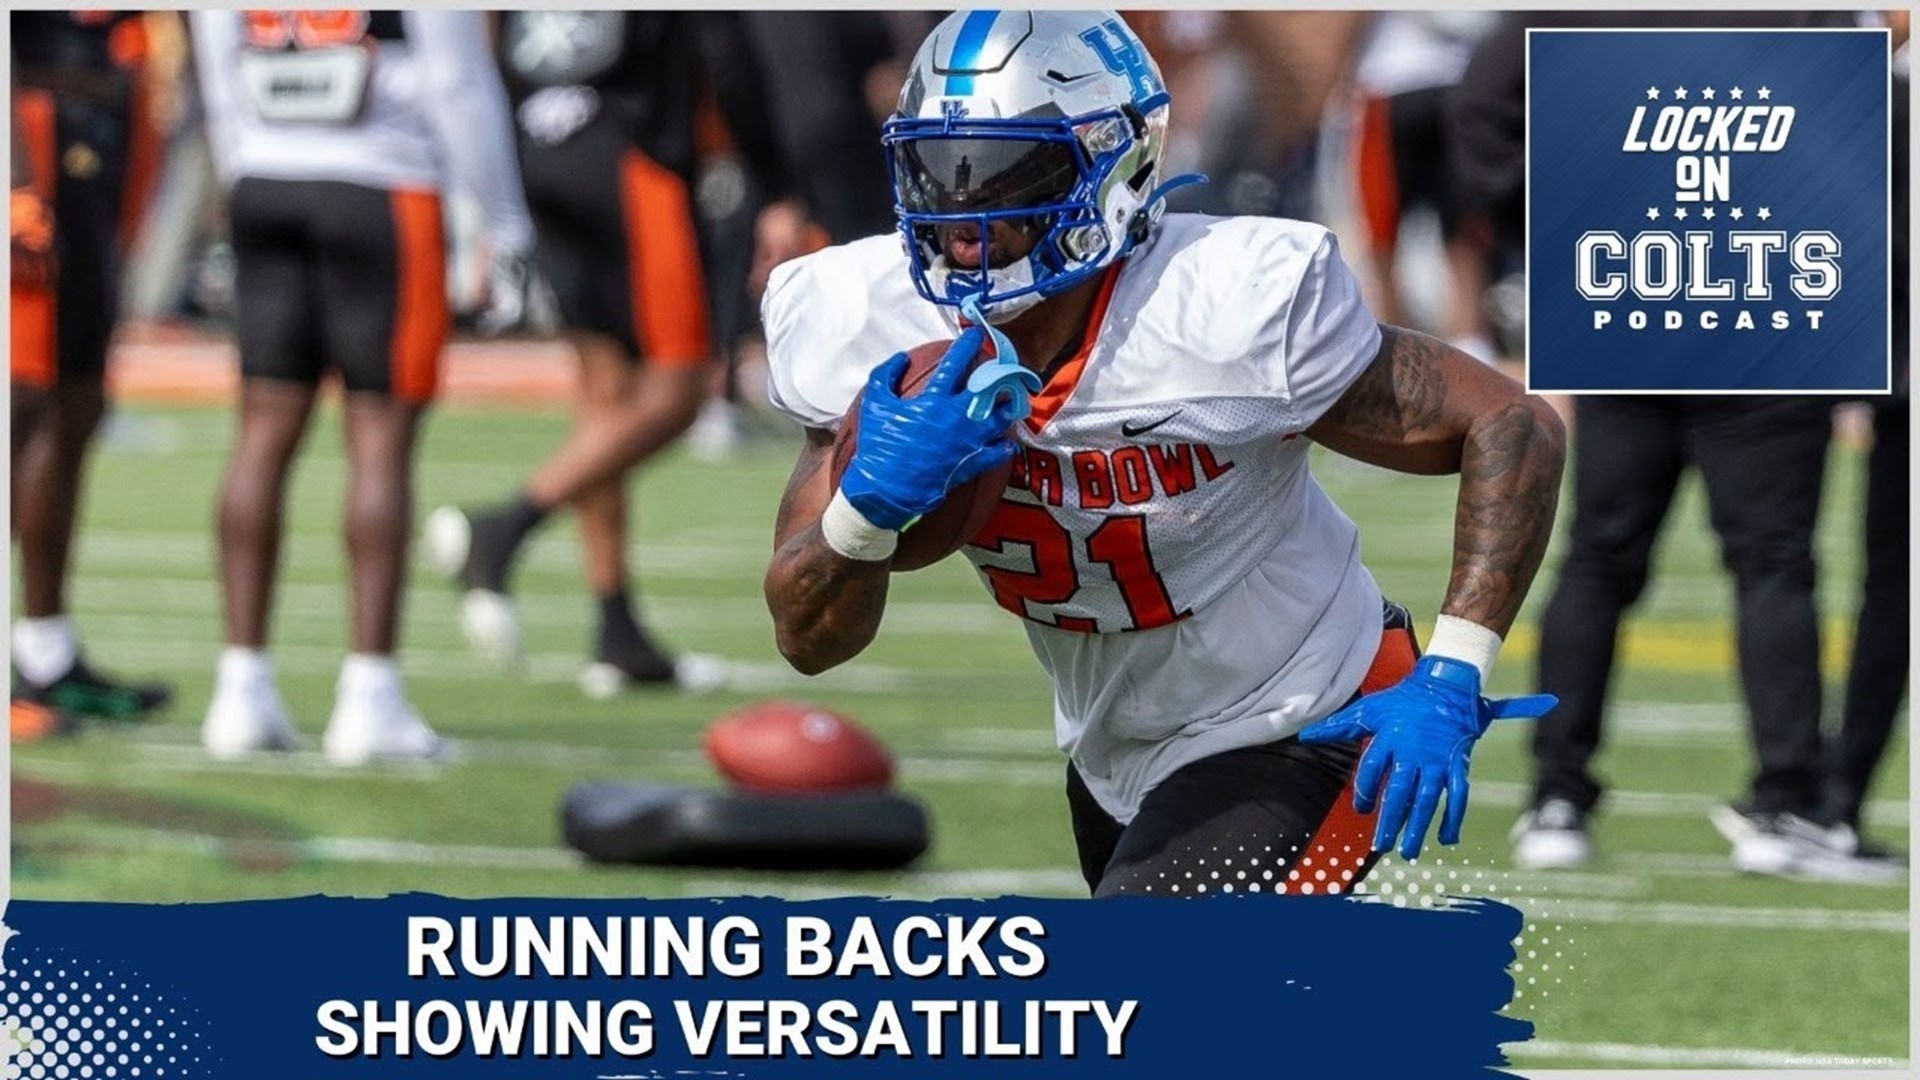 Senior Bowl practice has concluded ahead of Saturday's matchup, and the running backs continued to show their chops in the passing game.